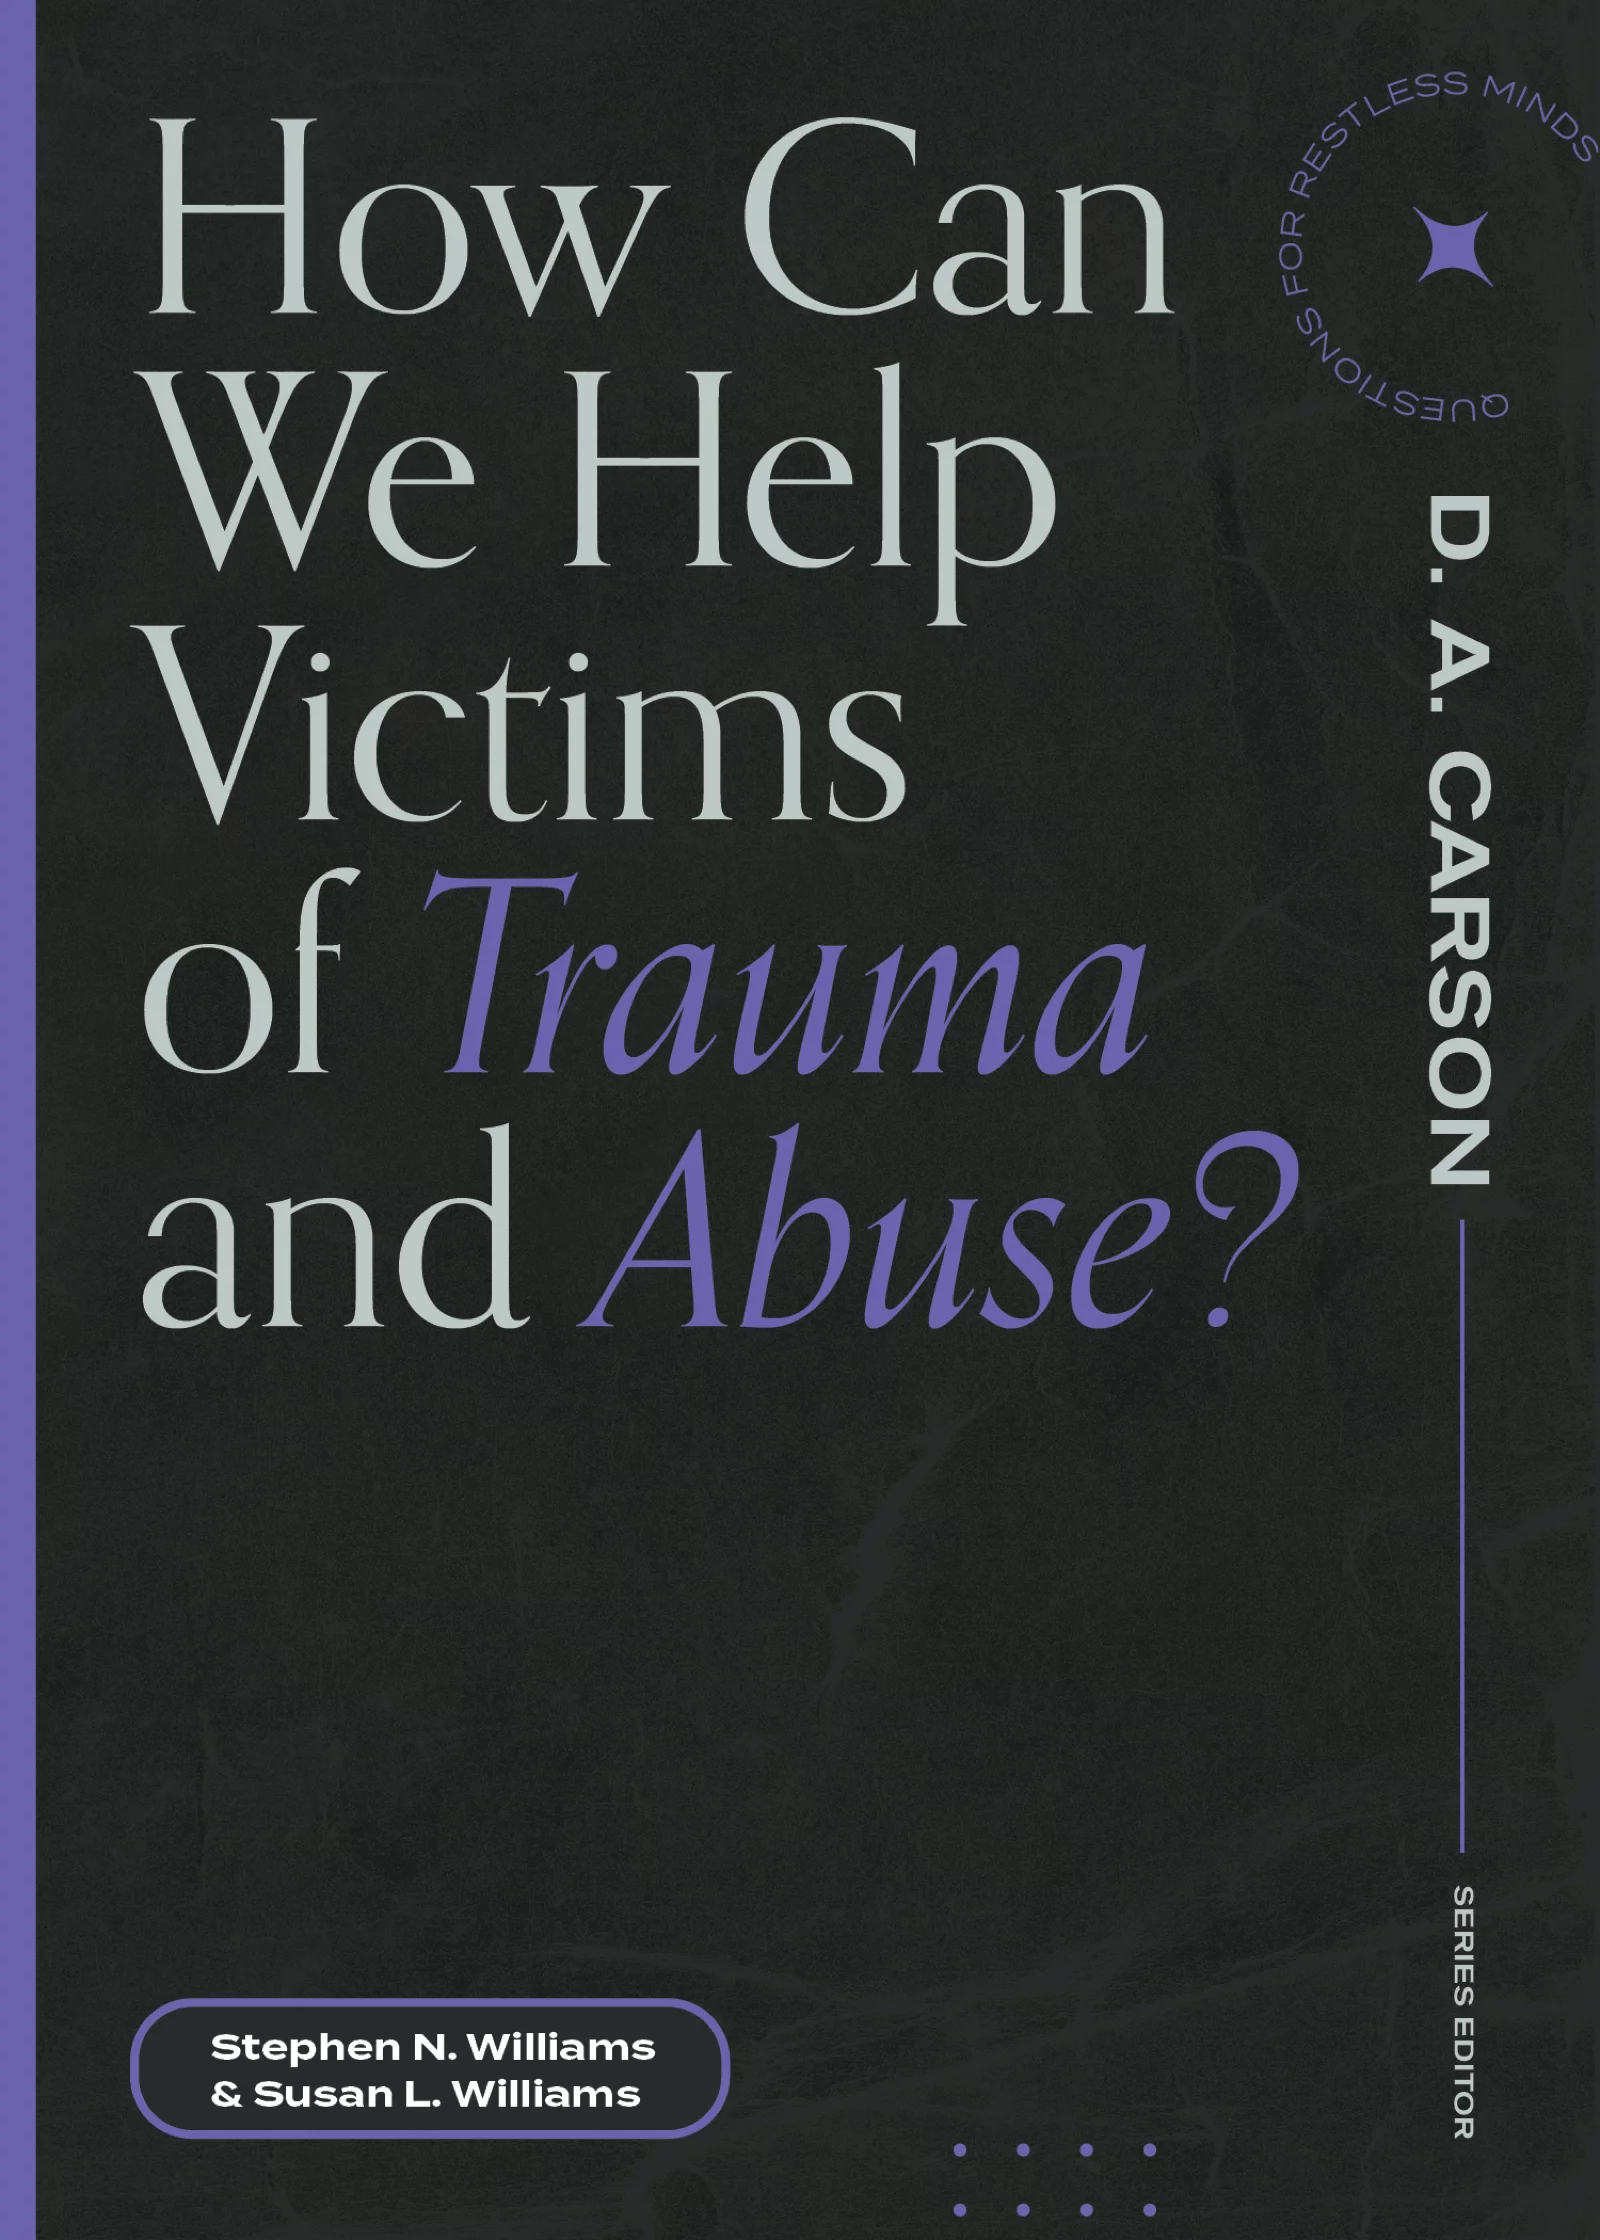  2022/08/Victims-of-Trauma-and-Abuse.webp 